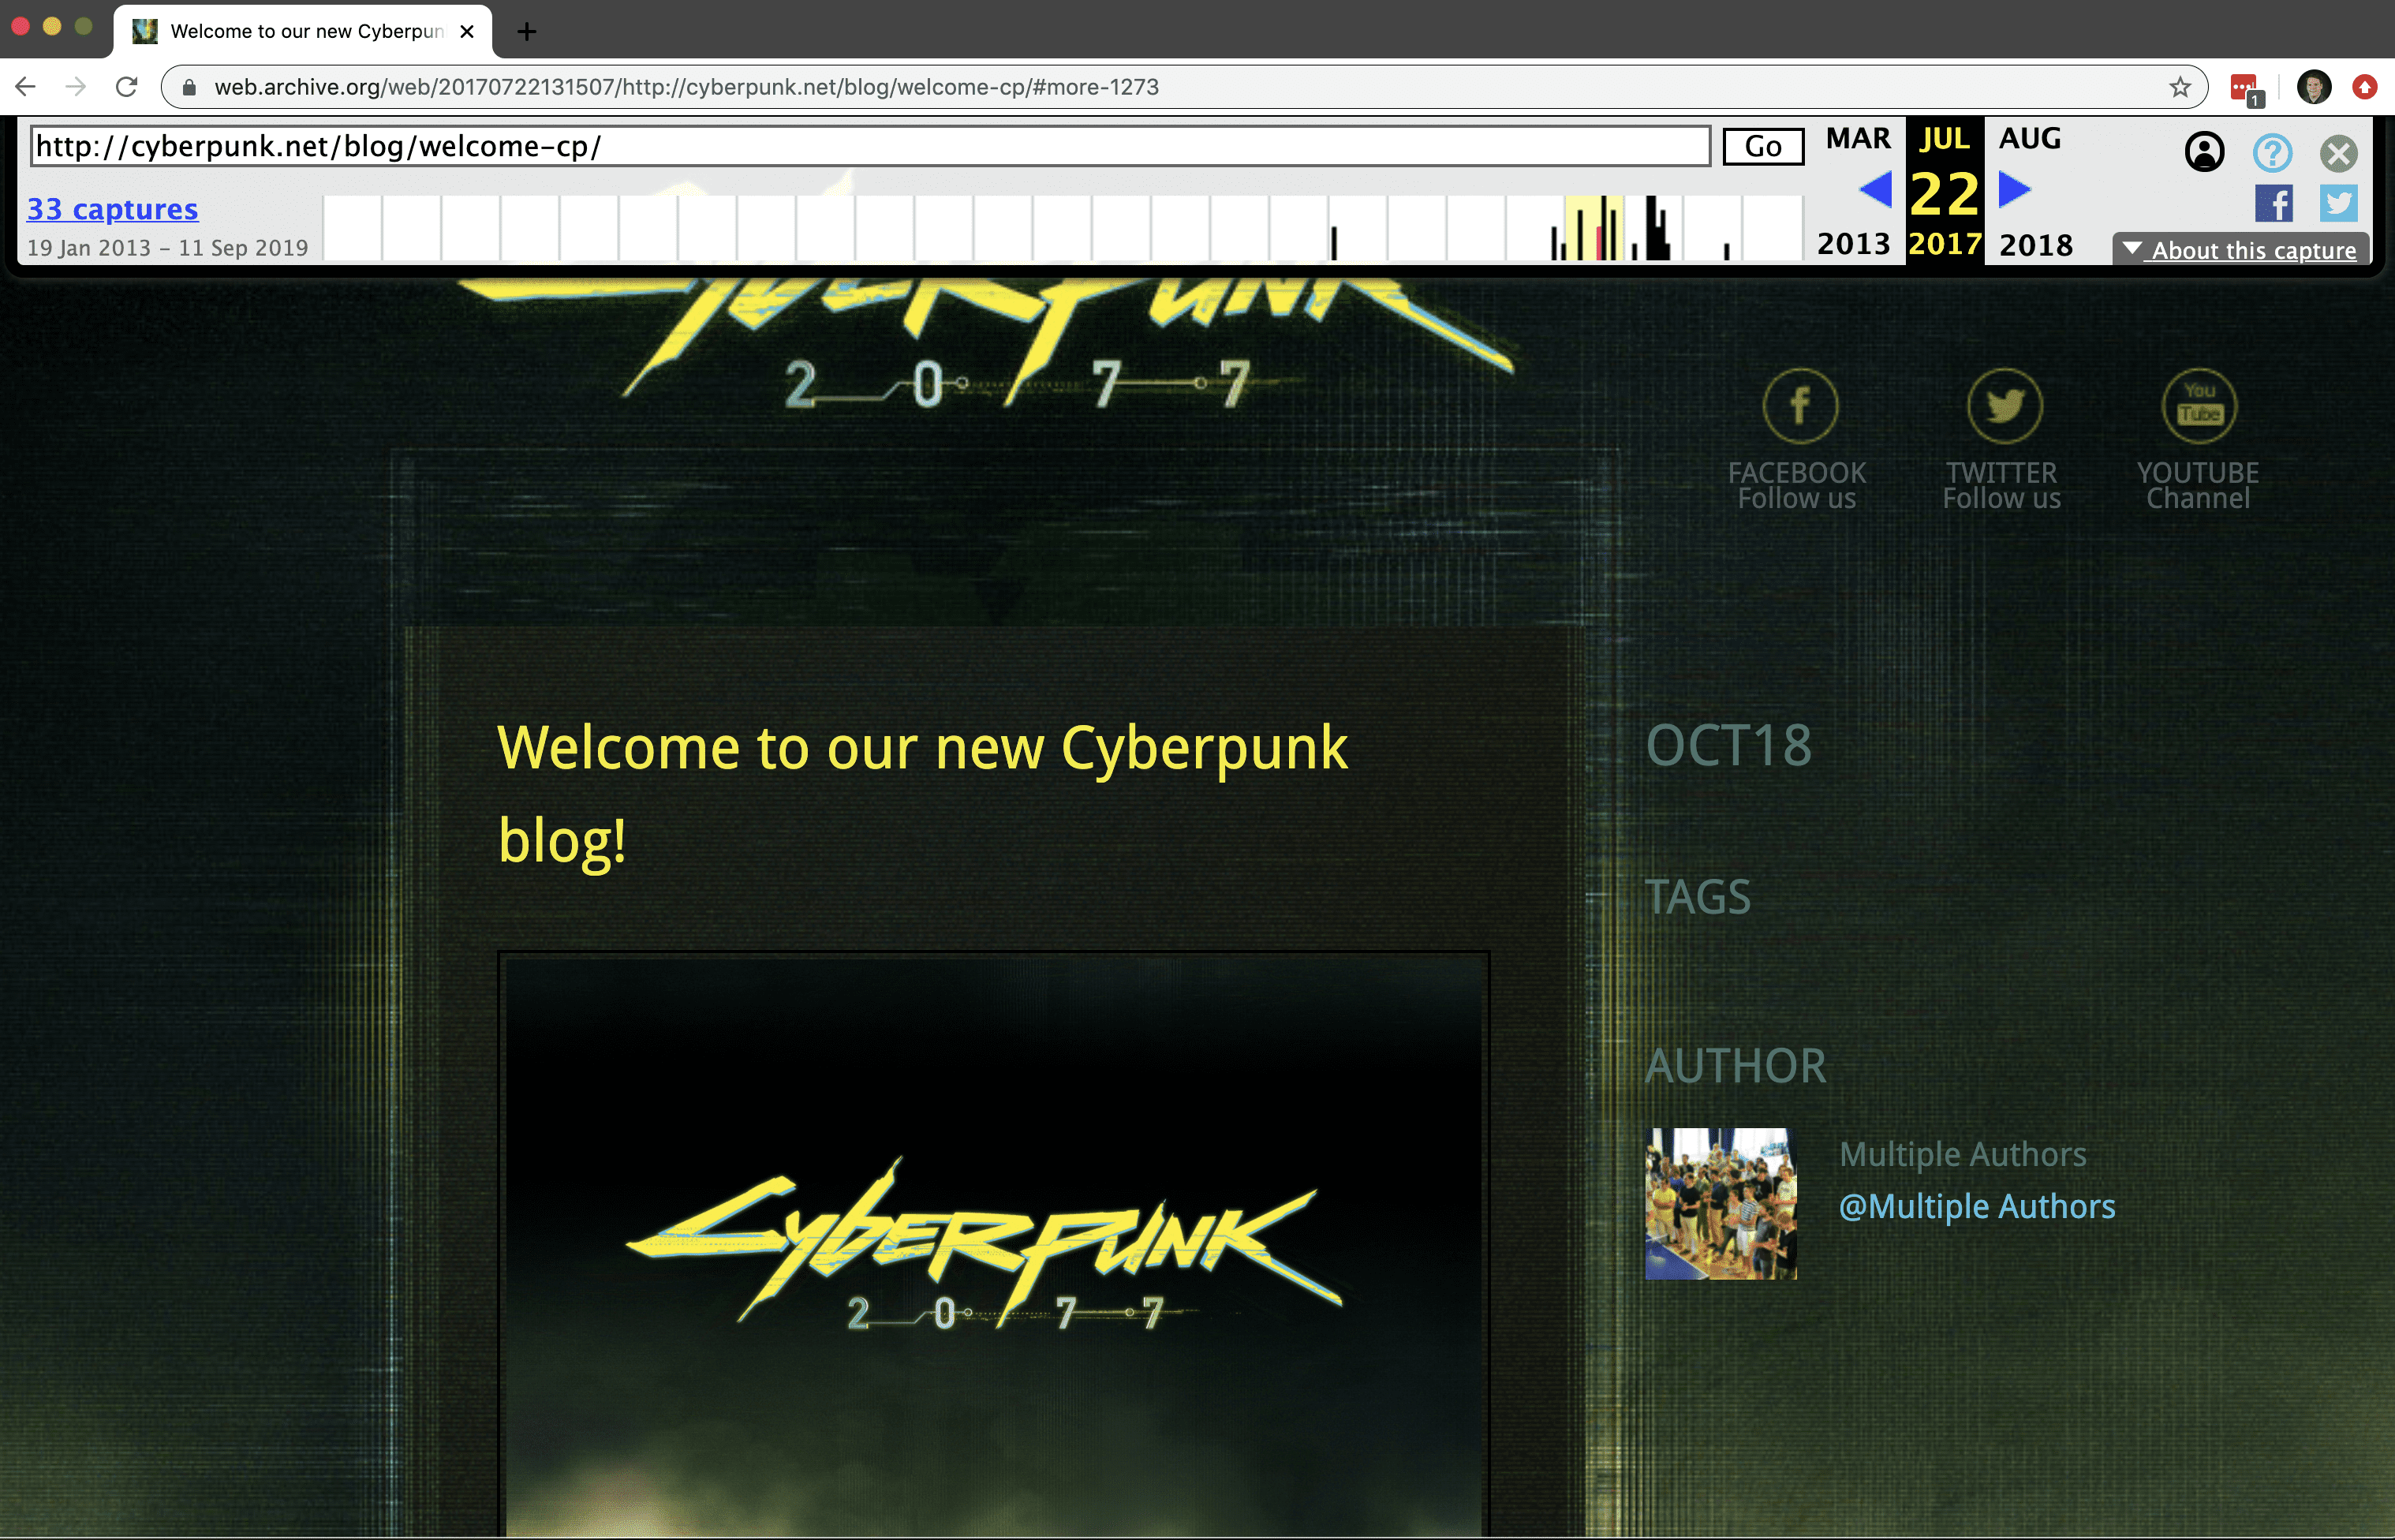 The Old Cyberpunk 2077 Blog at Archive.org